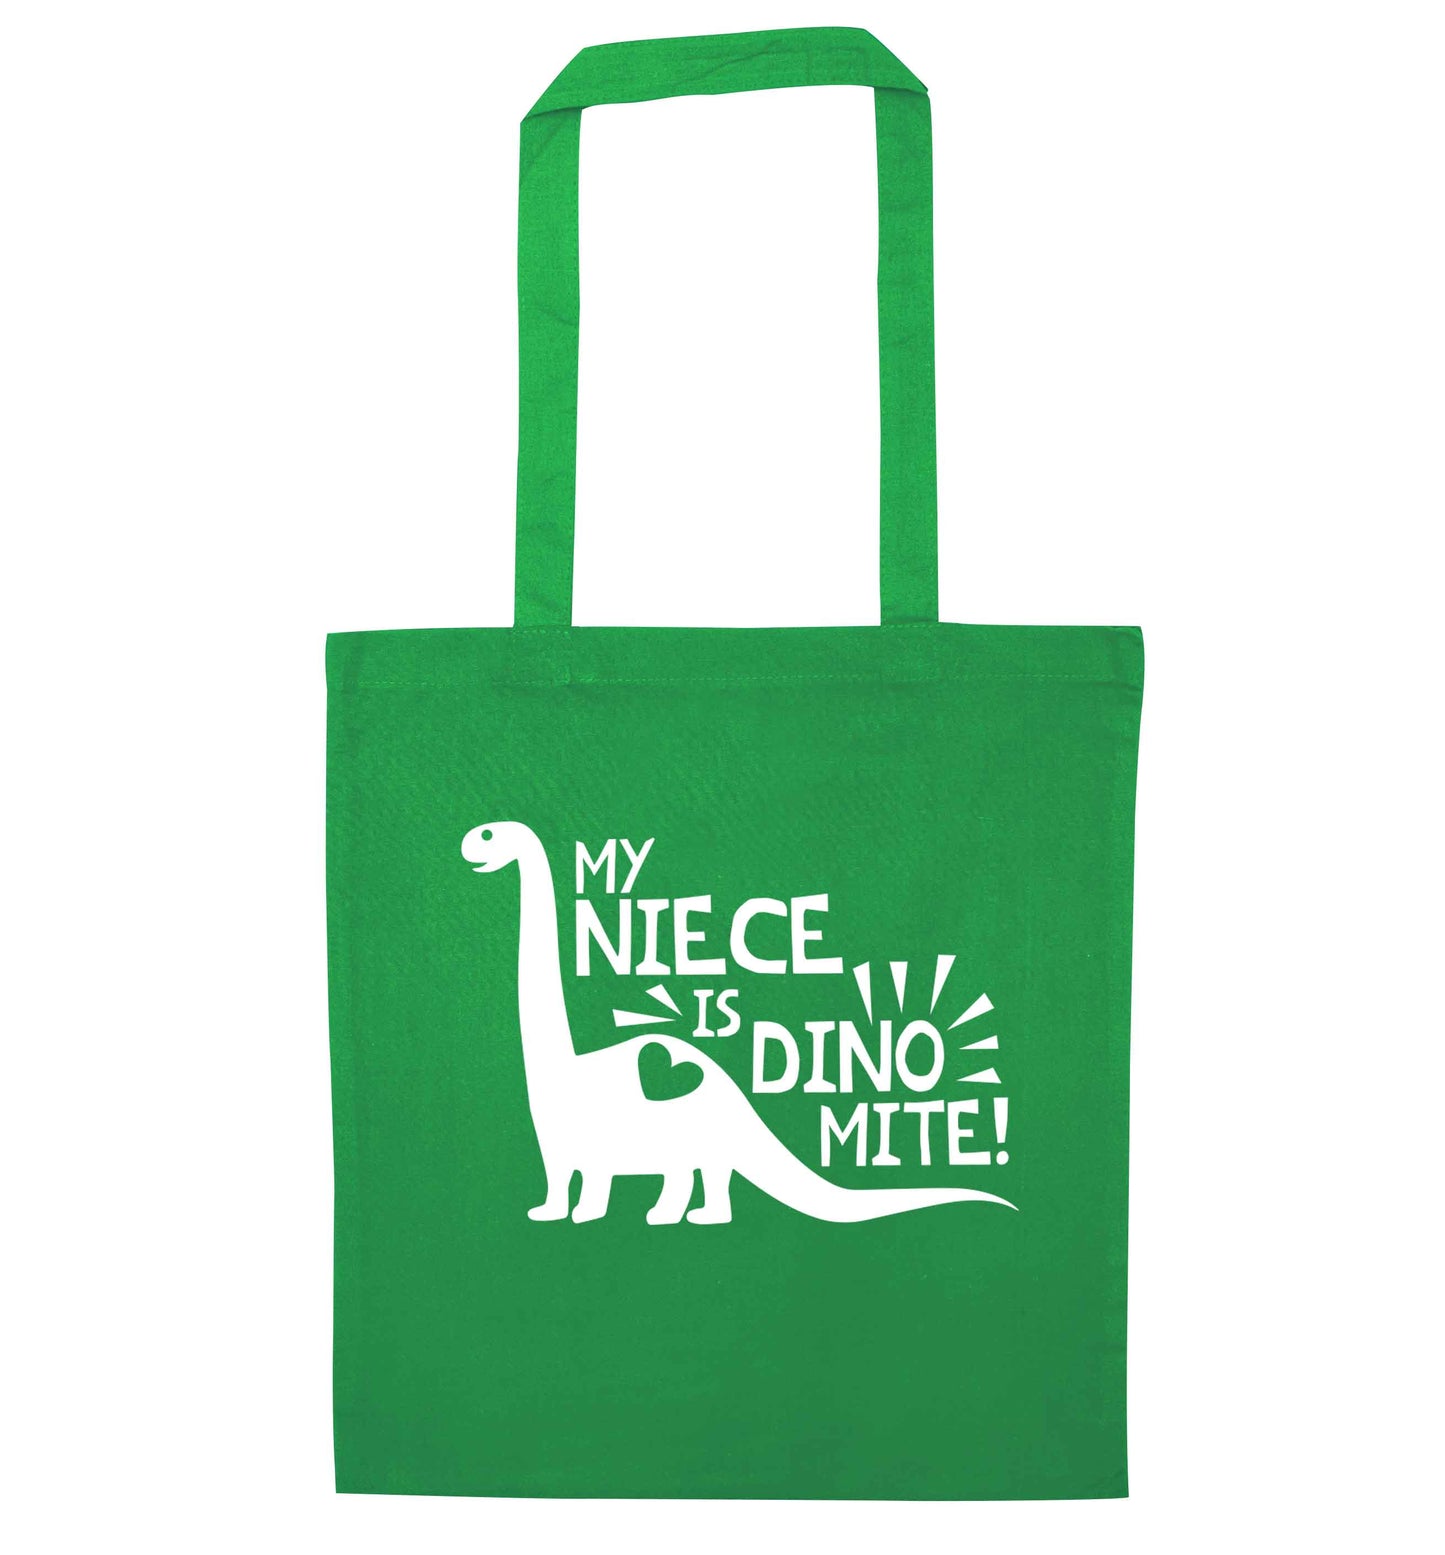 My niece is dinomite! green tote bag